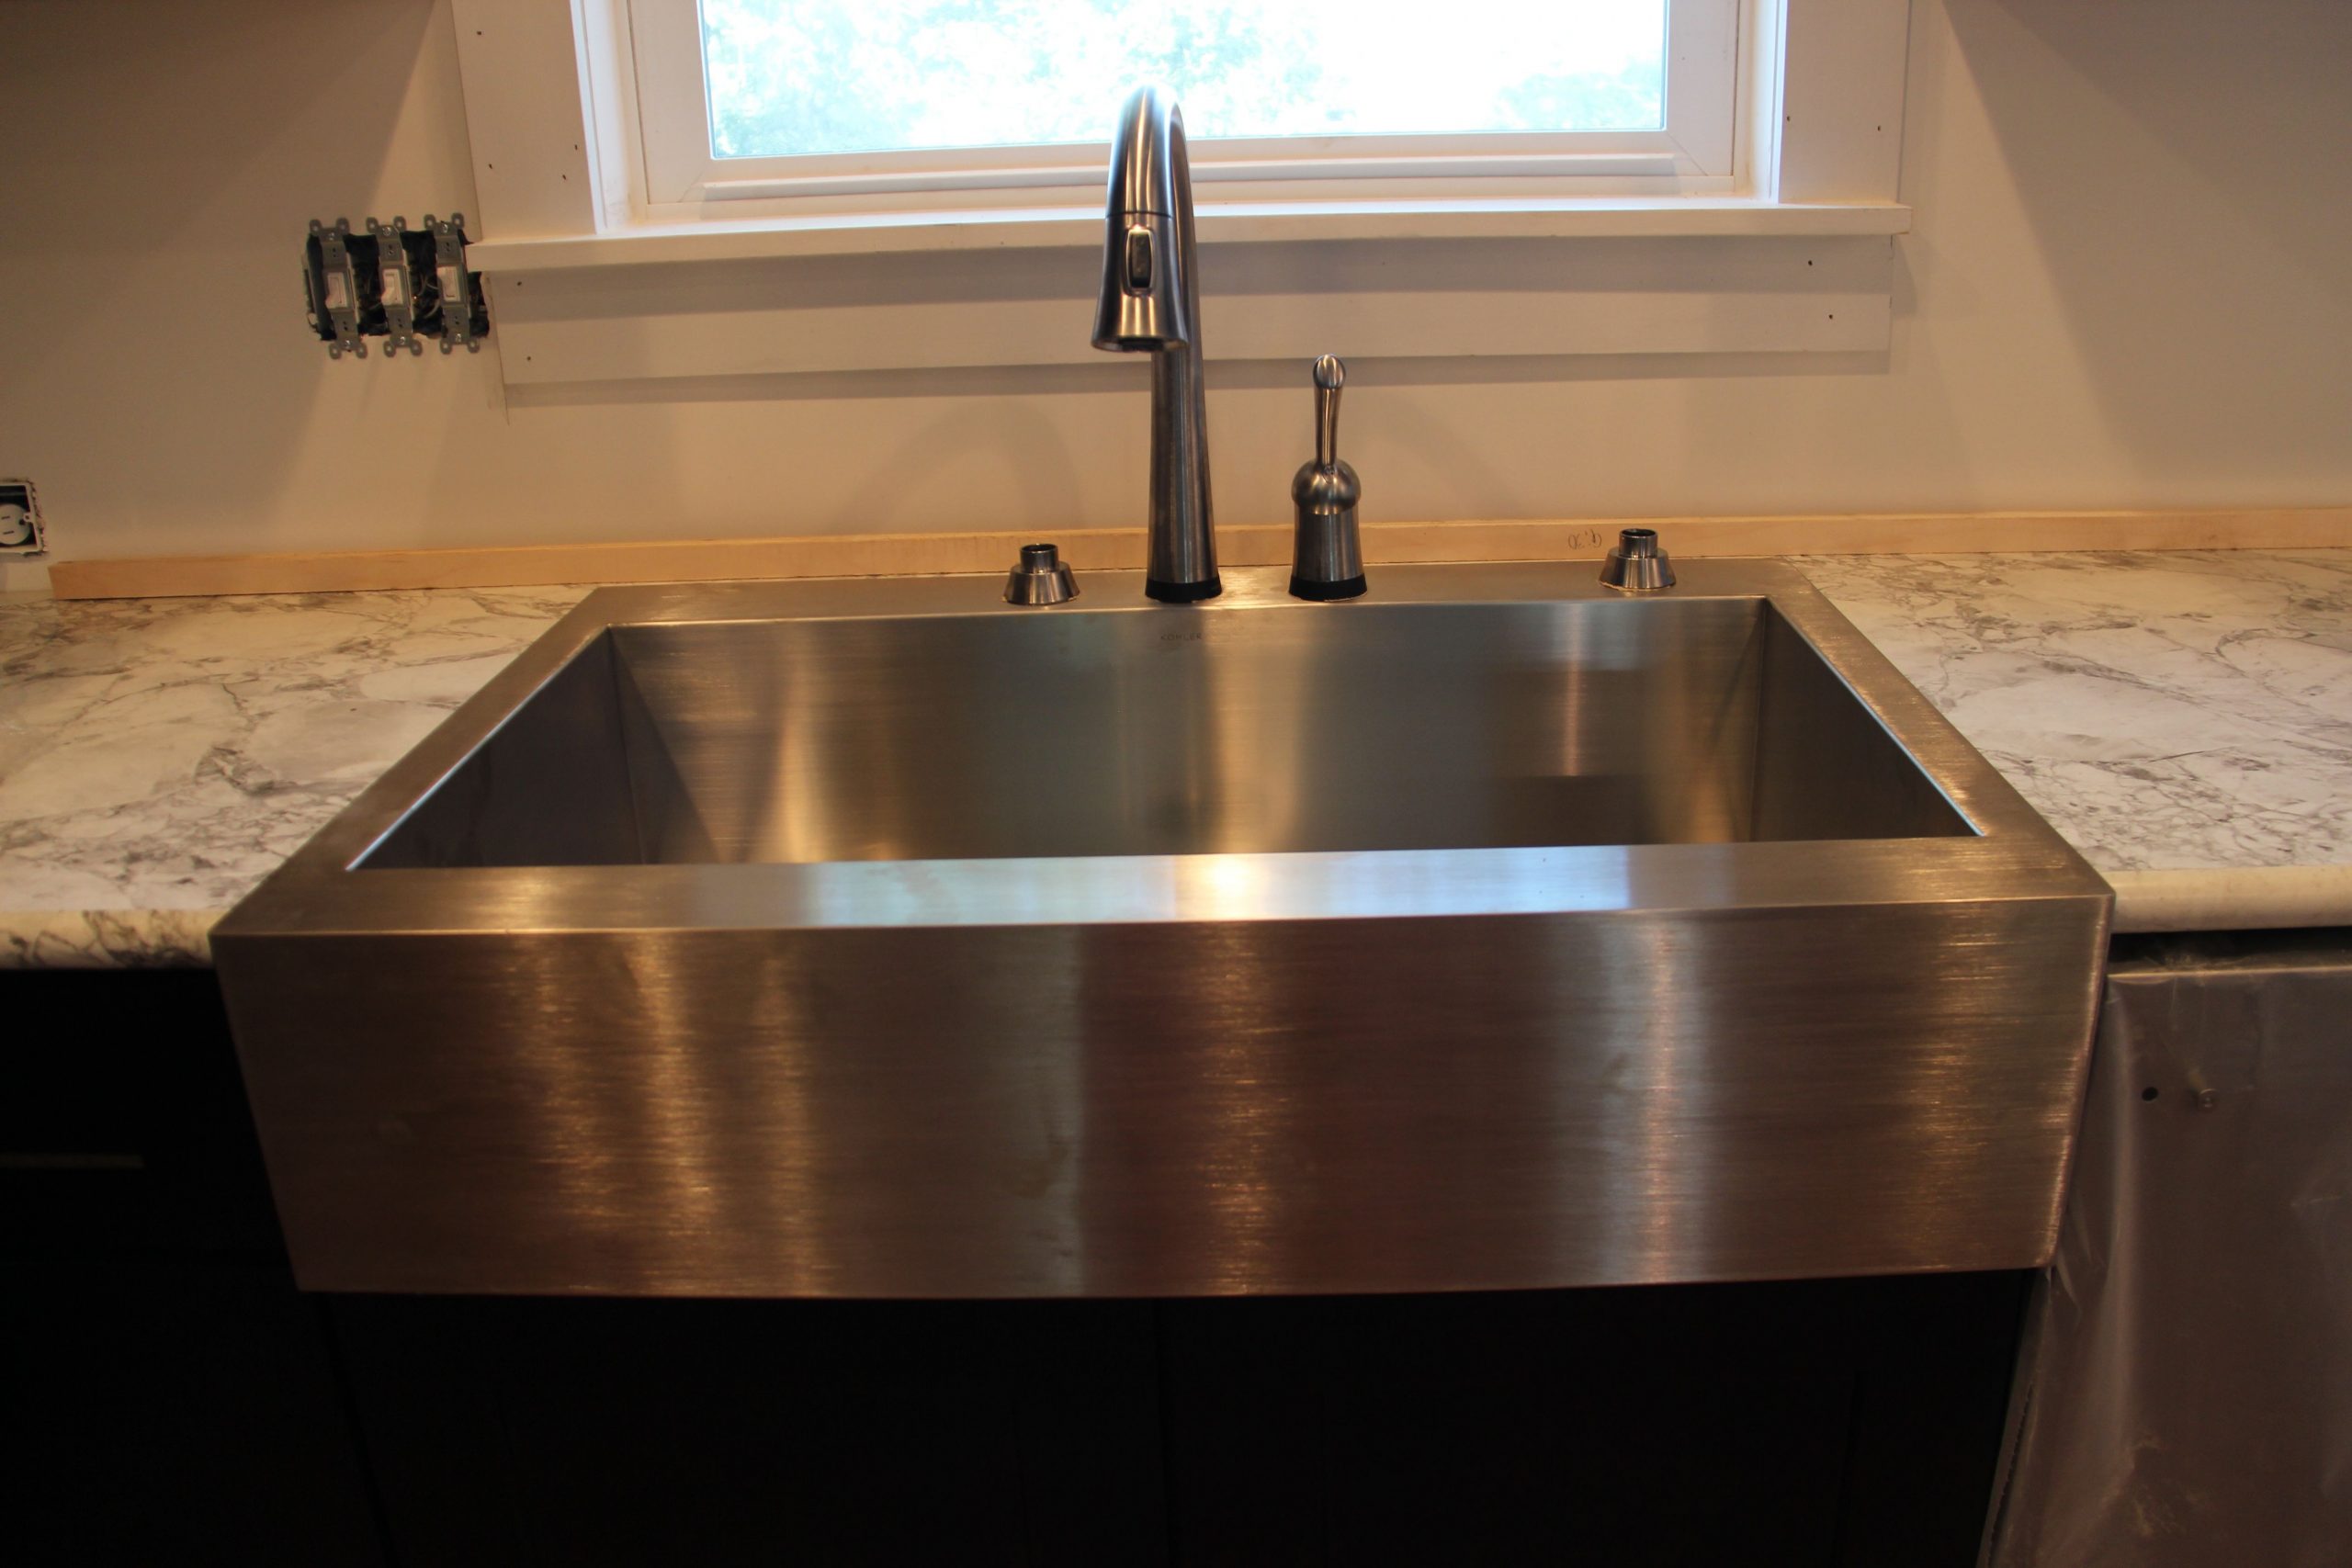 countertop apron sink
 Apron Front Sink with Laminate Countertop | Kitchen ideas ..